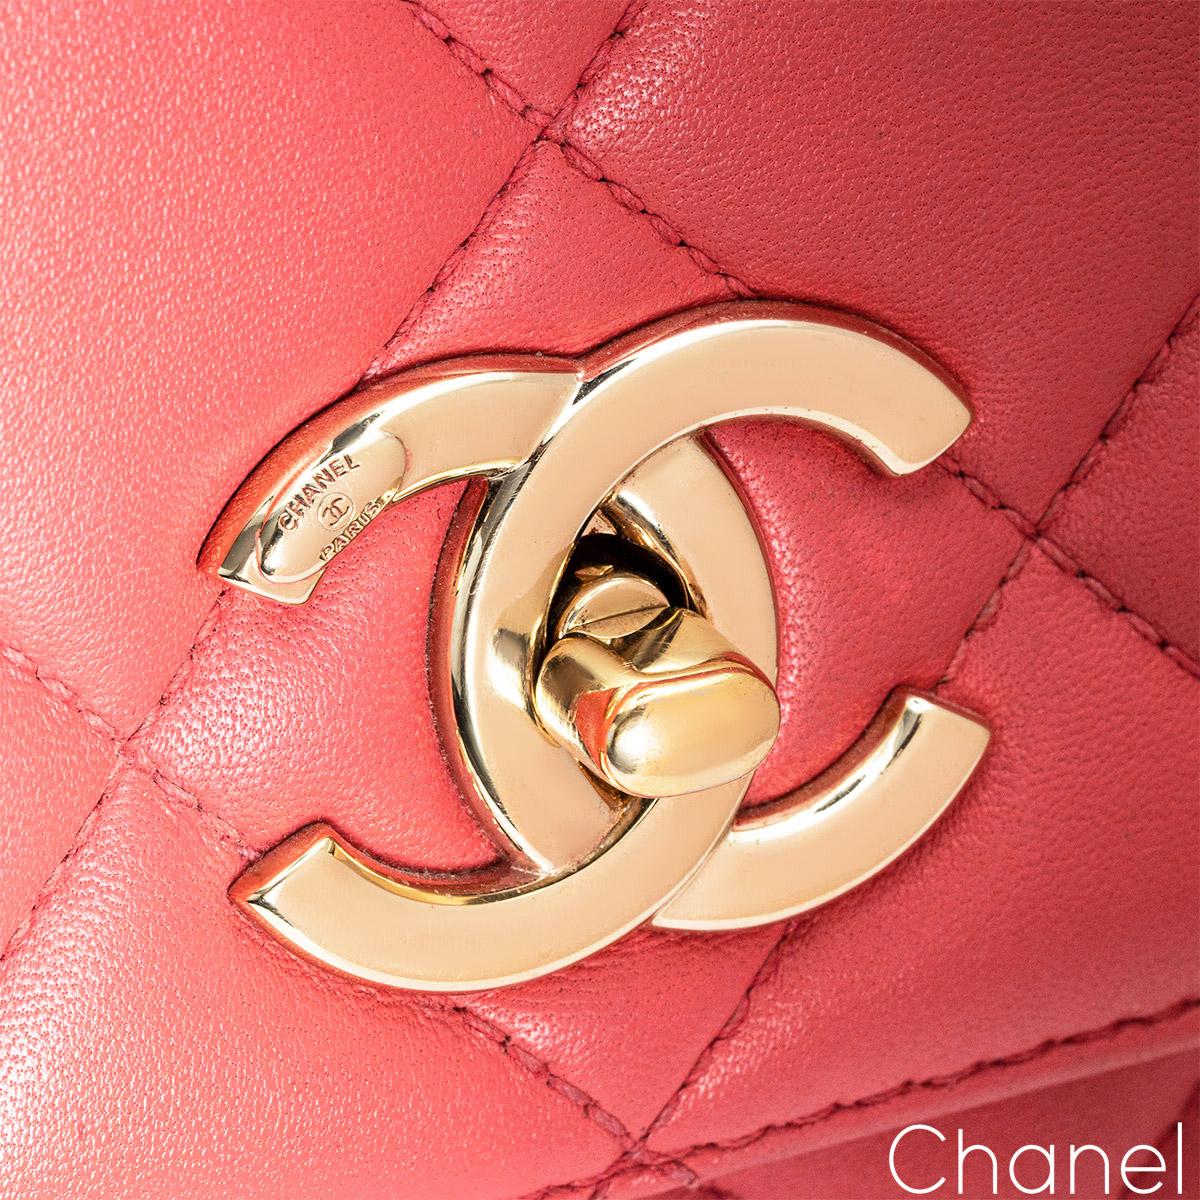 what brand is cc purse